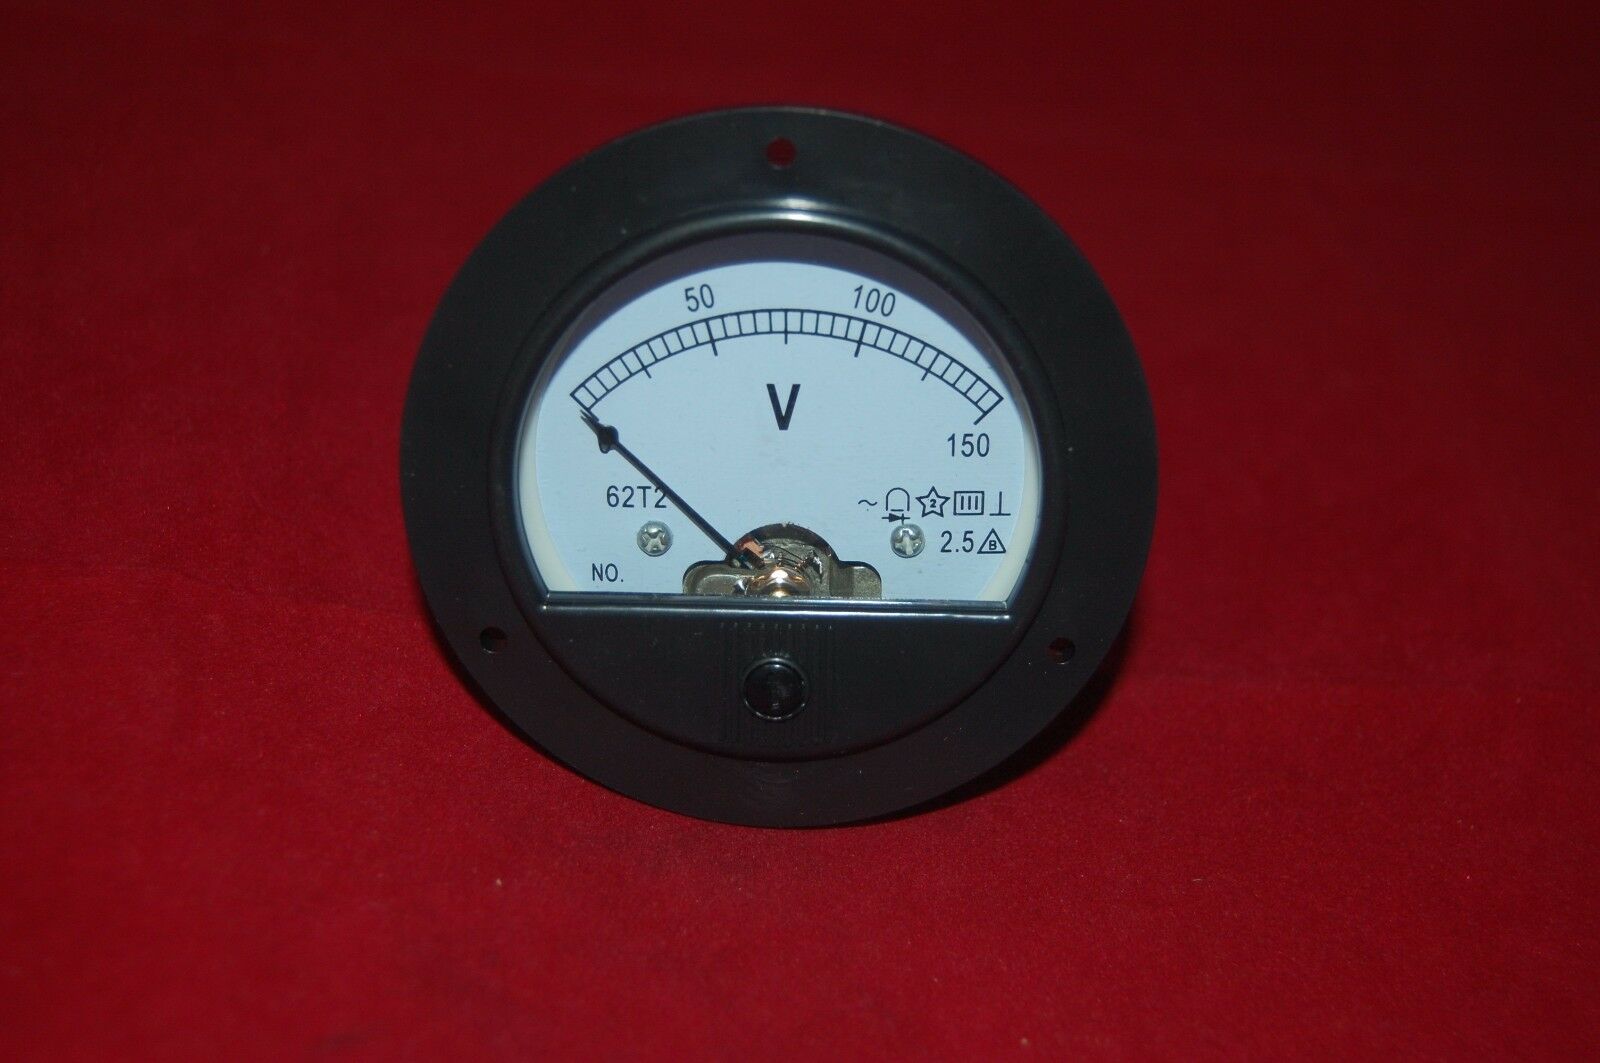 AC 0-150V Analog Voltmeter Volage Panel Meter Dia. 90mm DH62 direct Connect